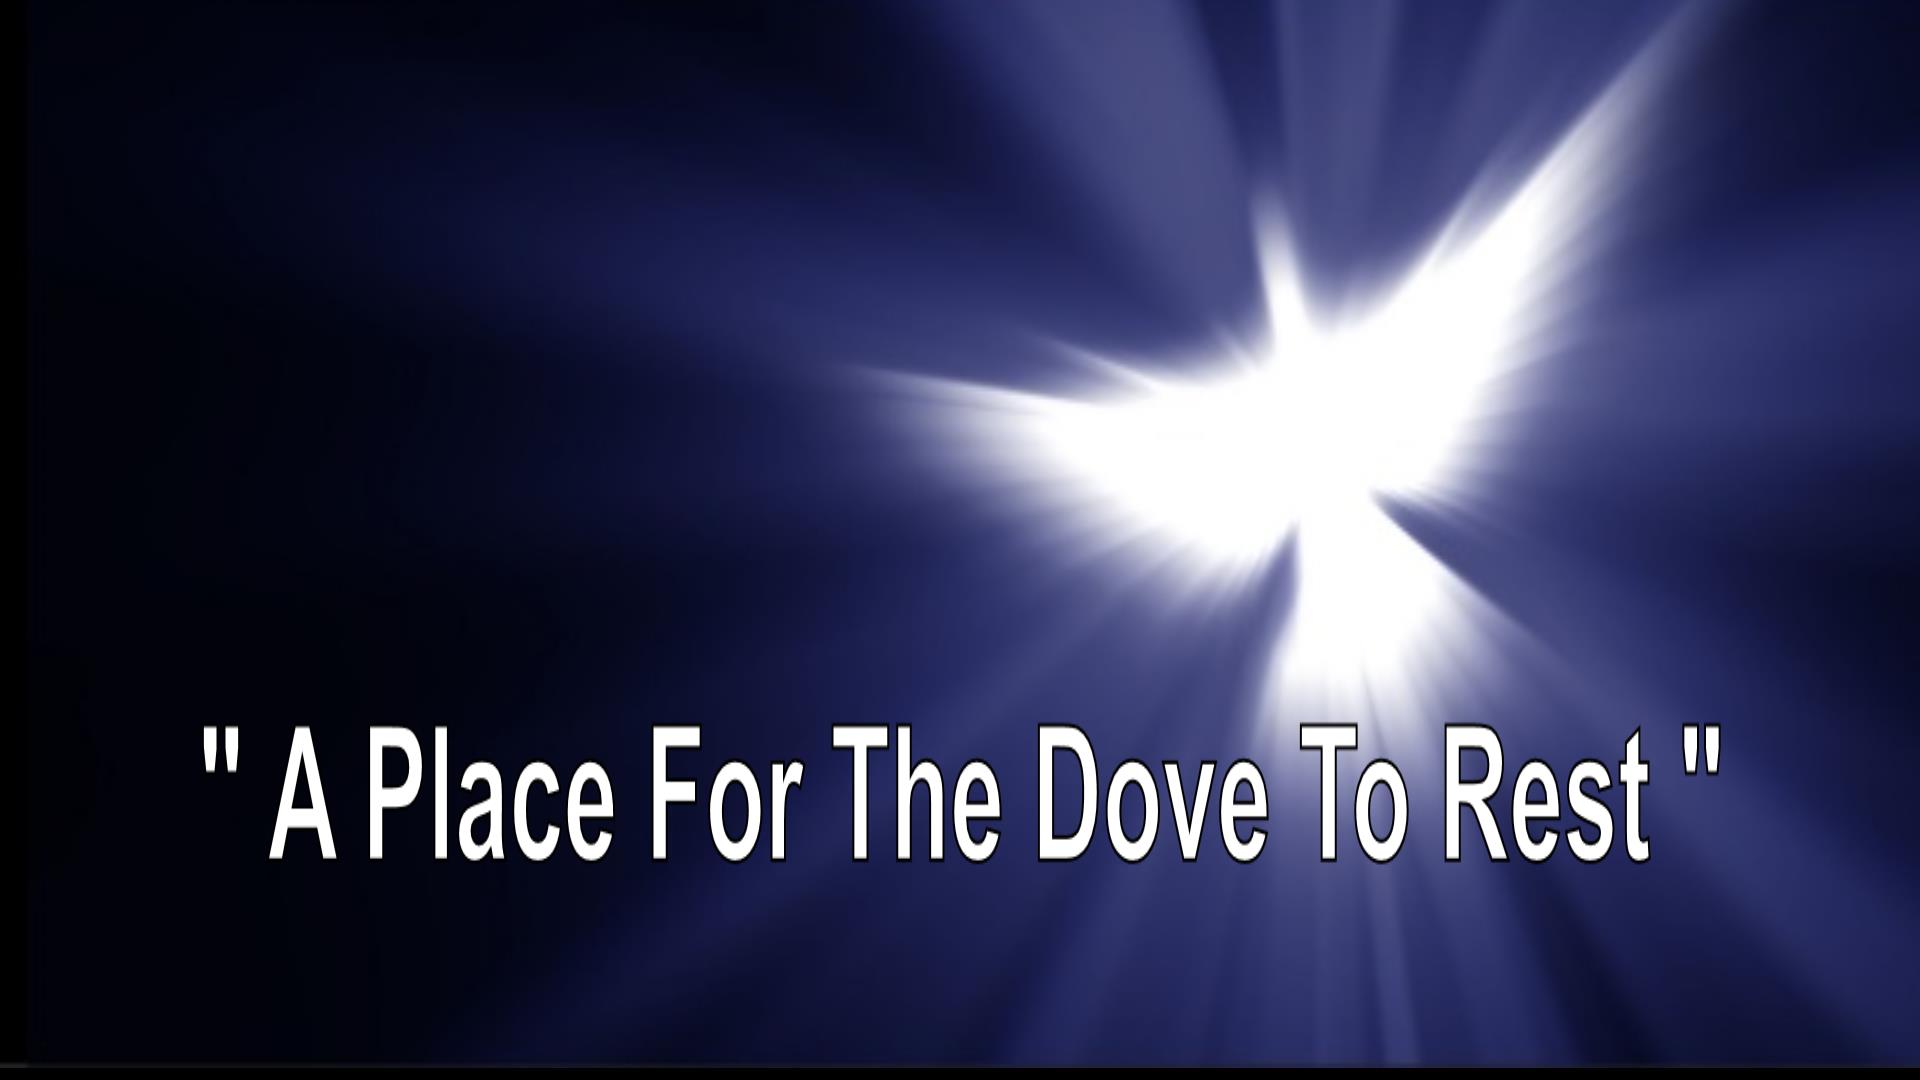 A Place For The Dove To Rest